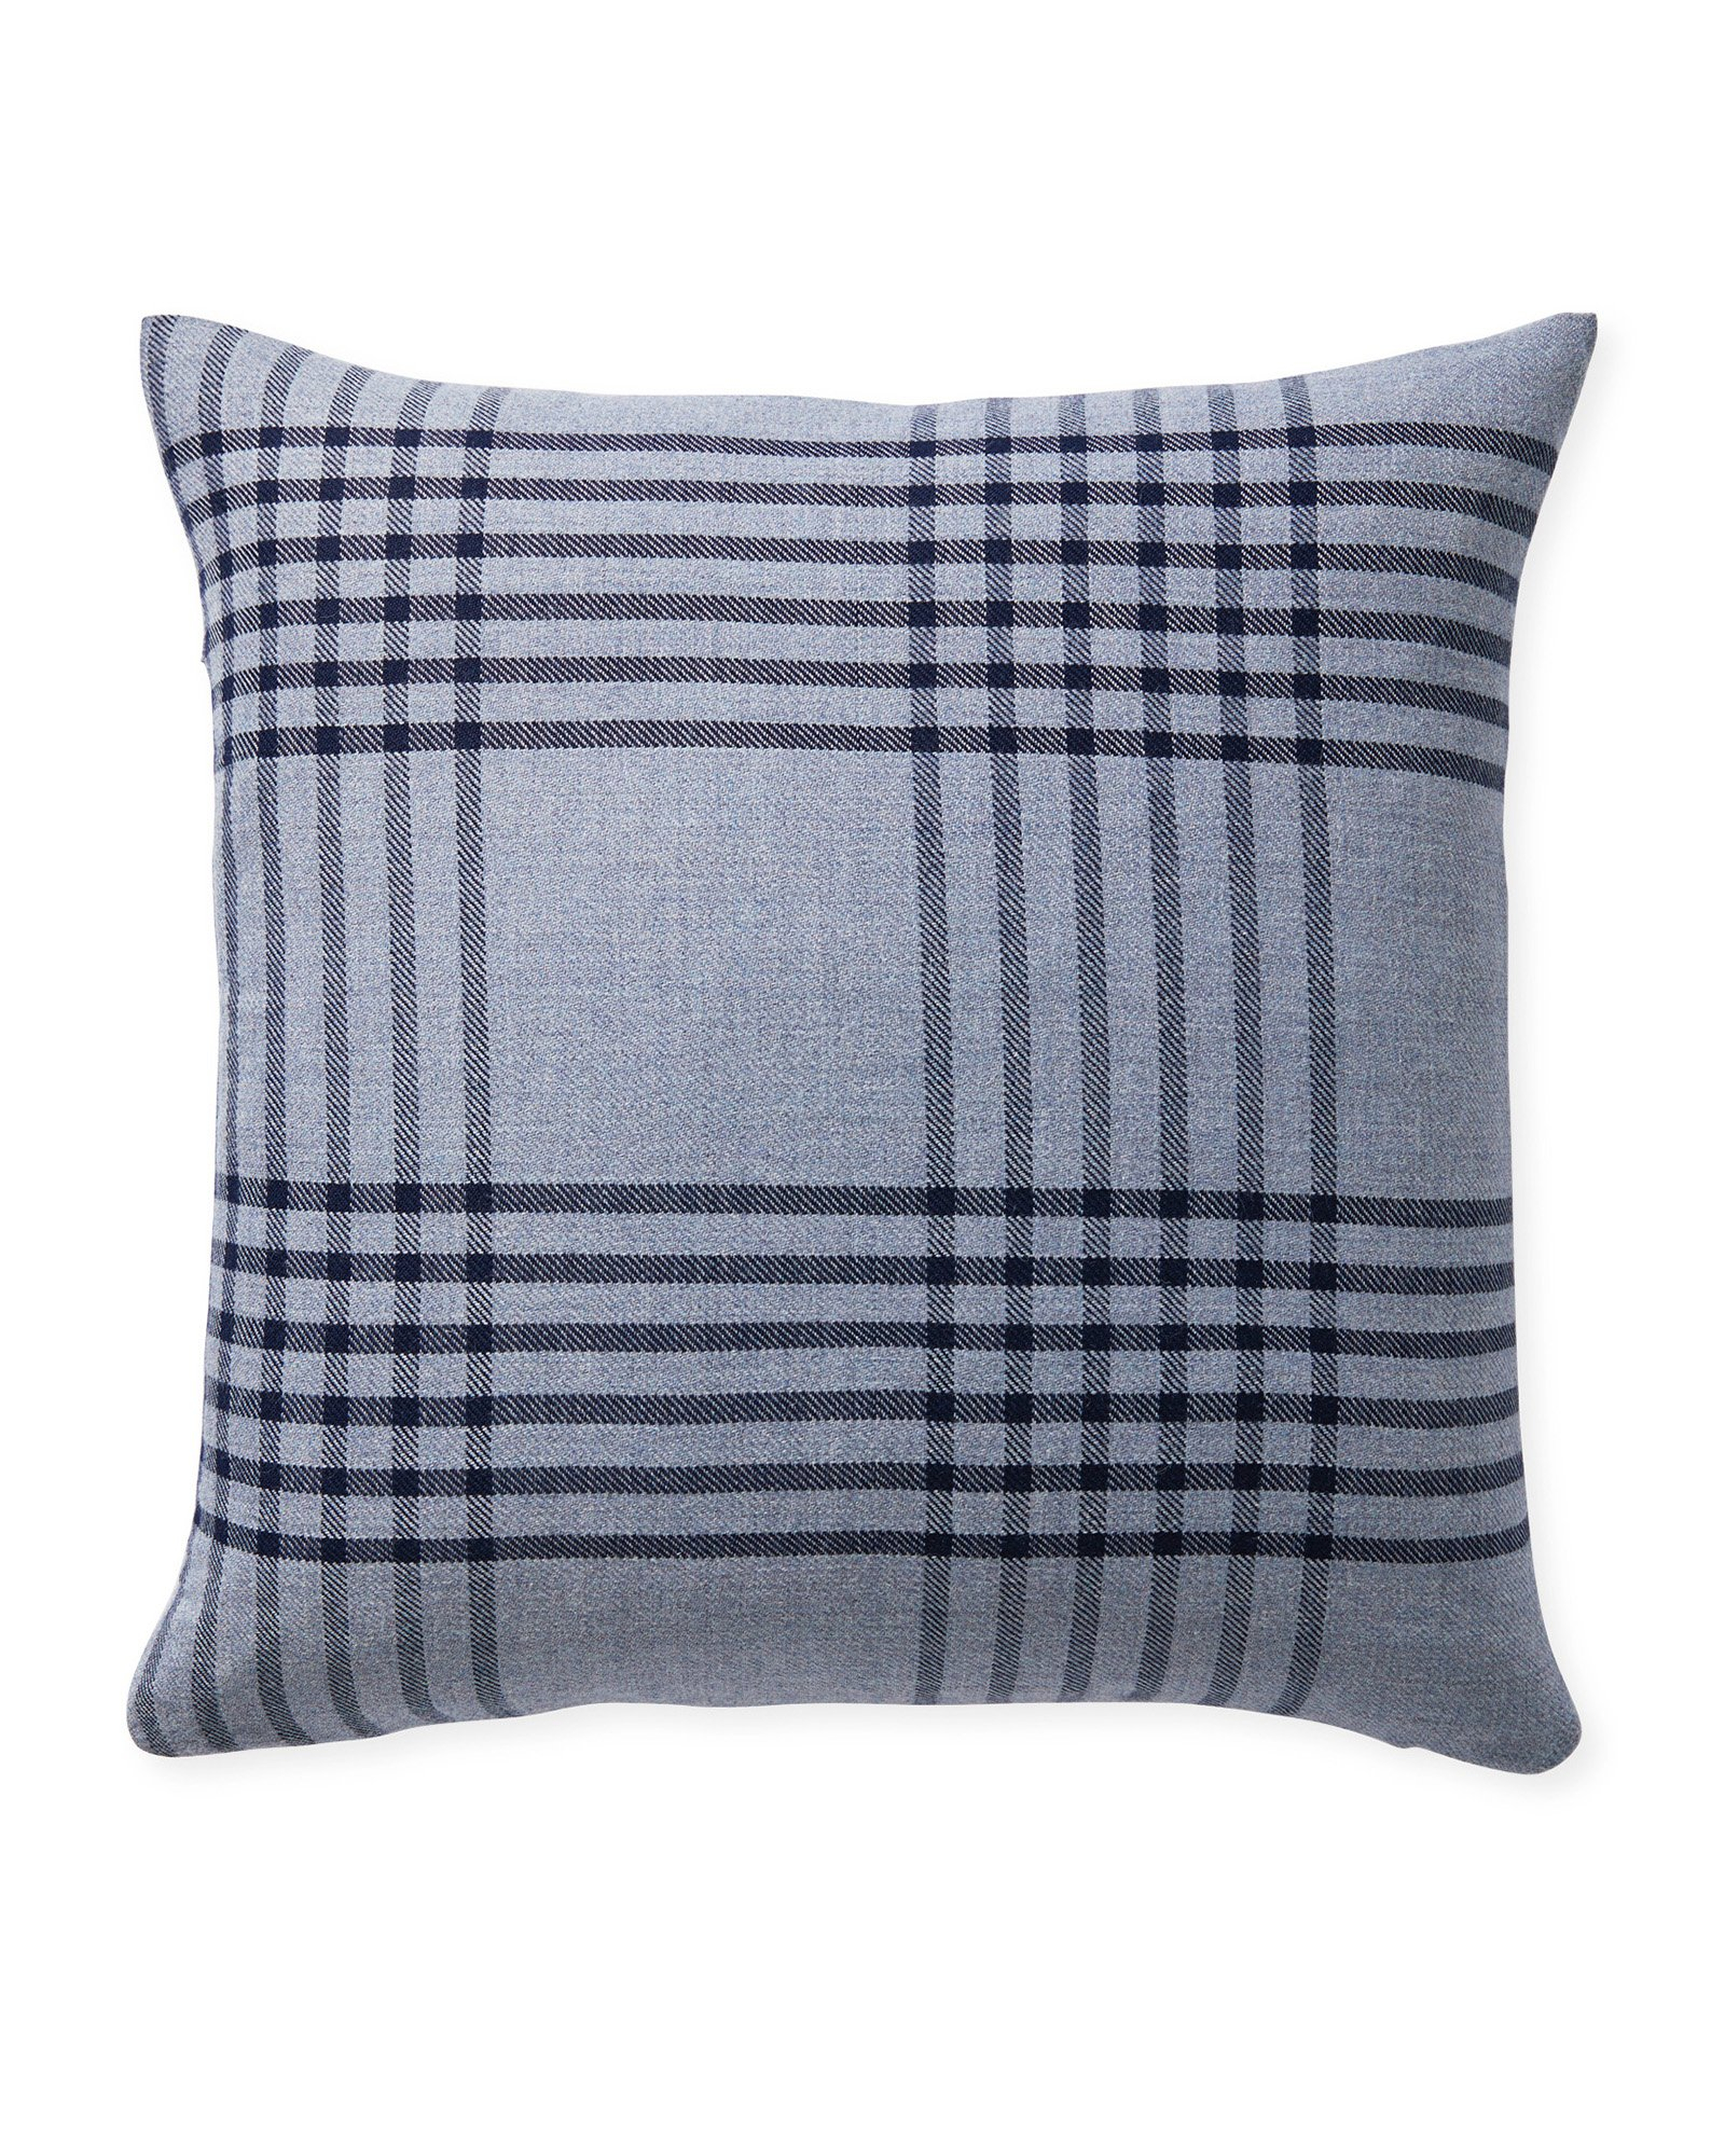 Blakely Plaid 24"SQ. Pillow Cover - Chambray - Insert sold separately - Serena and Lily